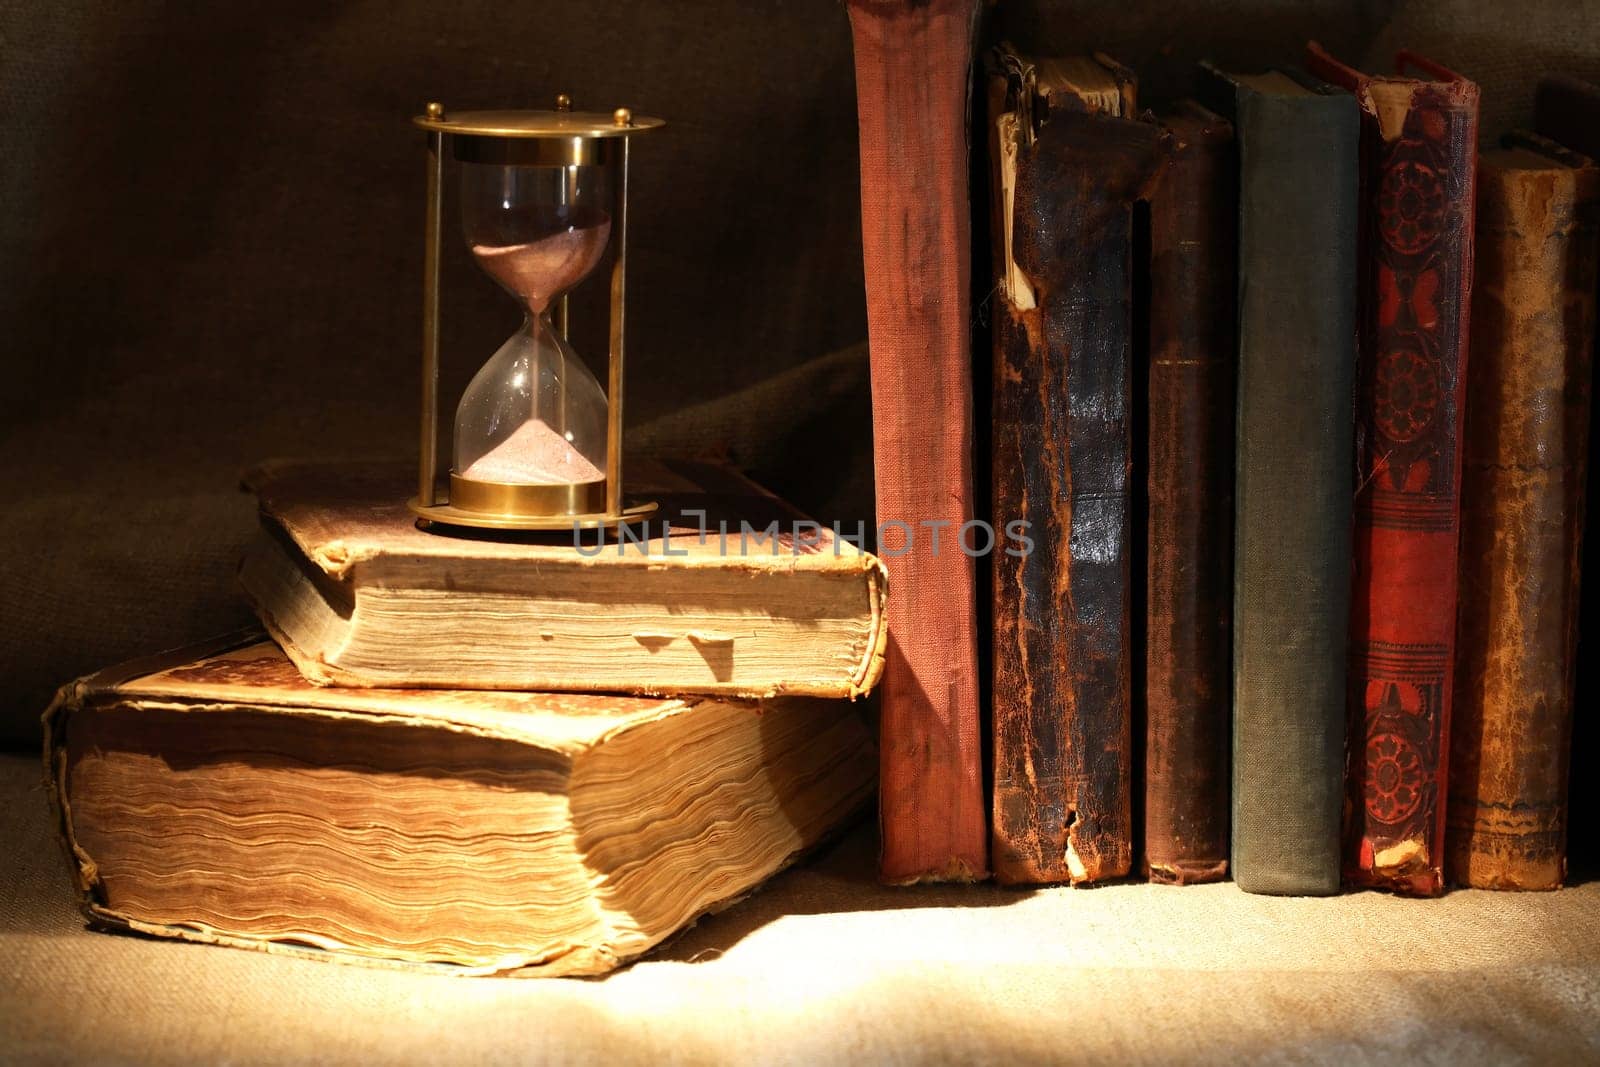 Nice vintage still life with old hourglass and old books